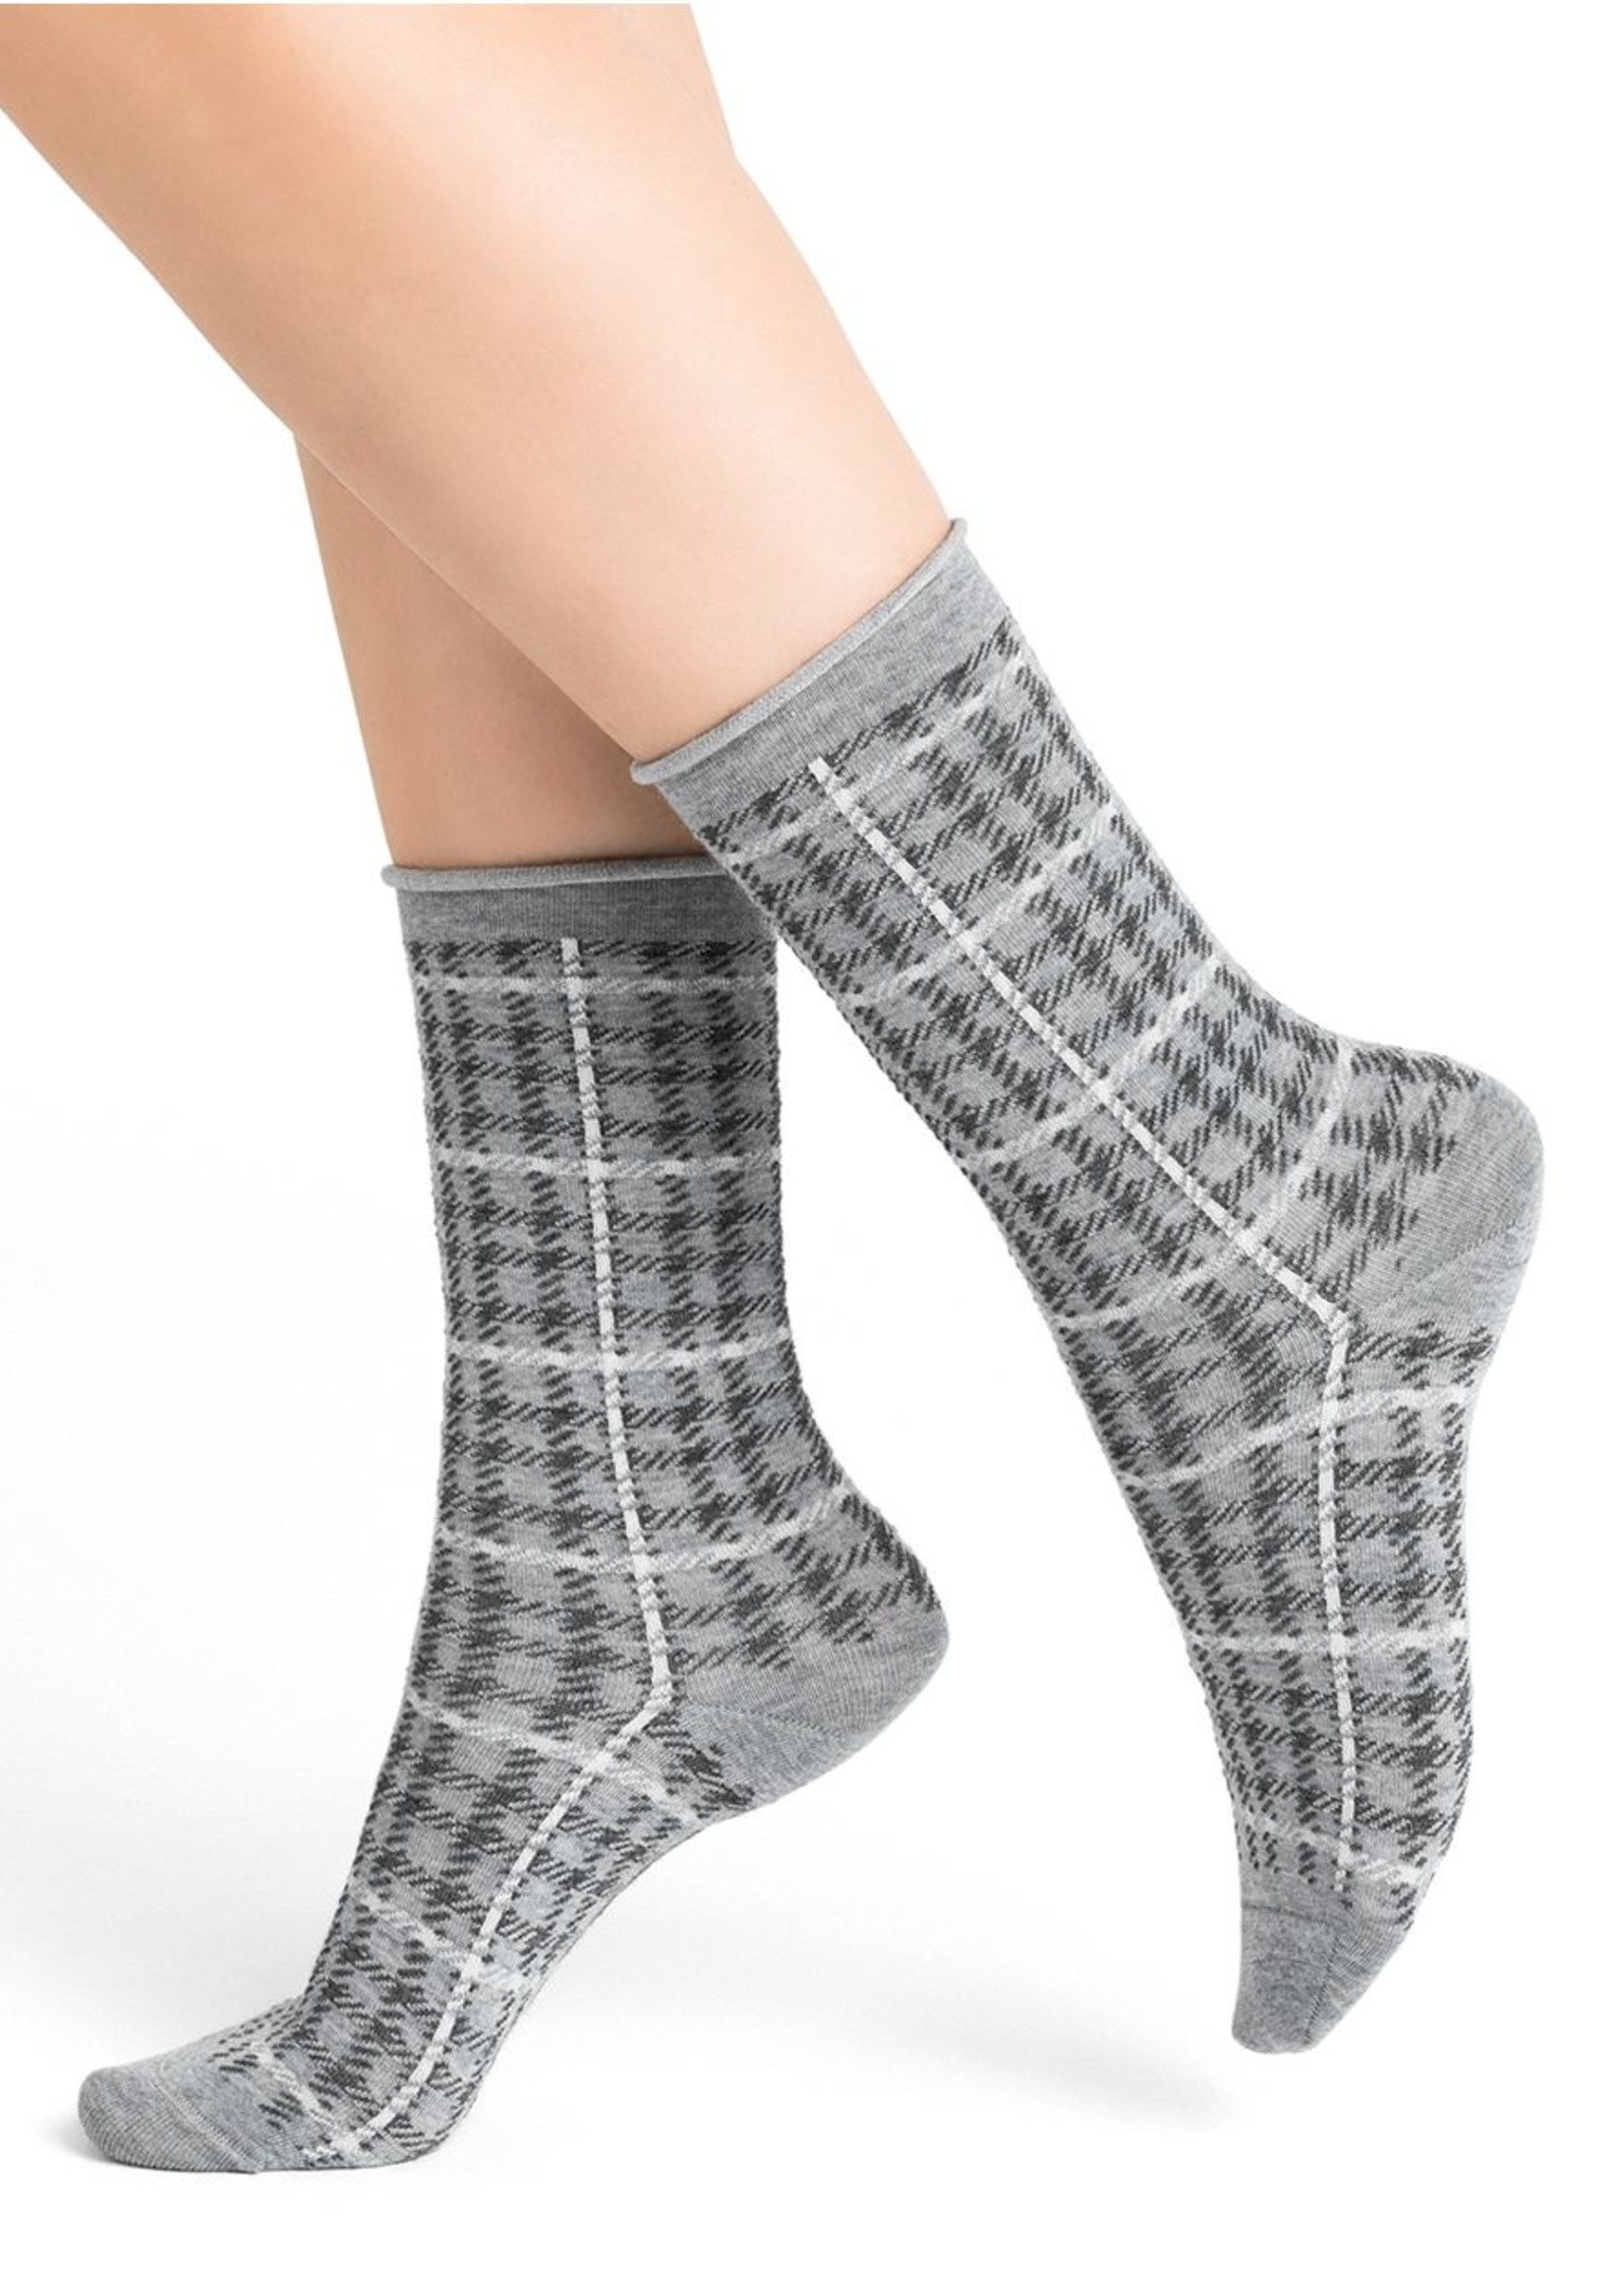 Bleuforet Fine Wool Socks with Check Pattern